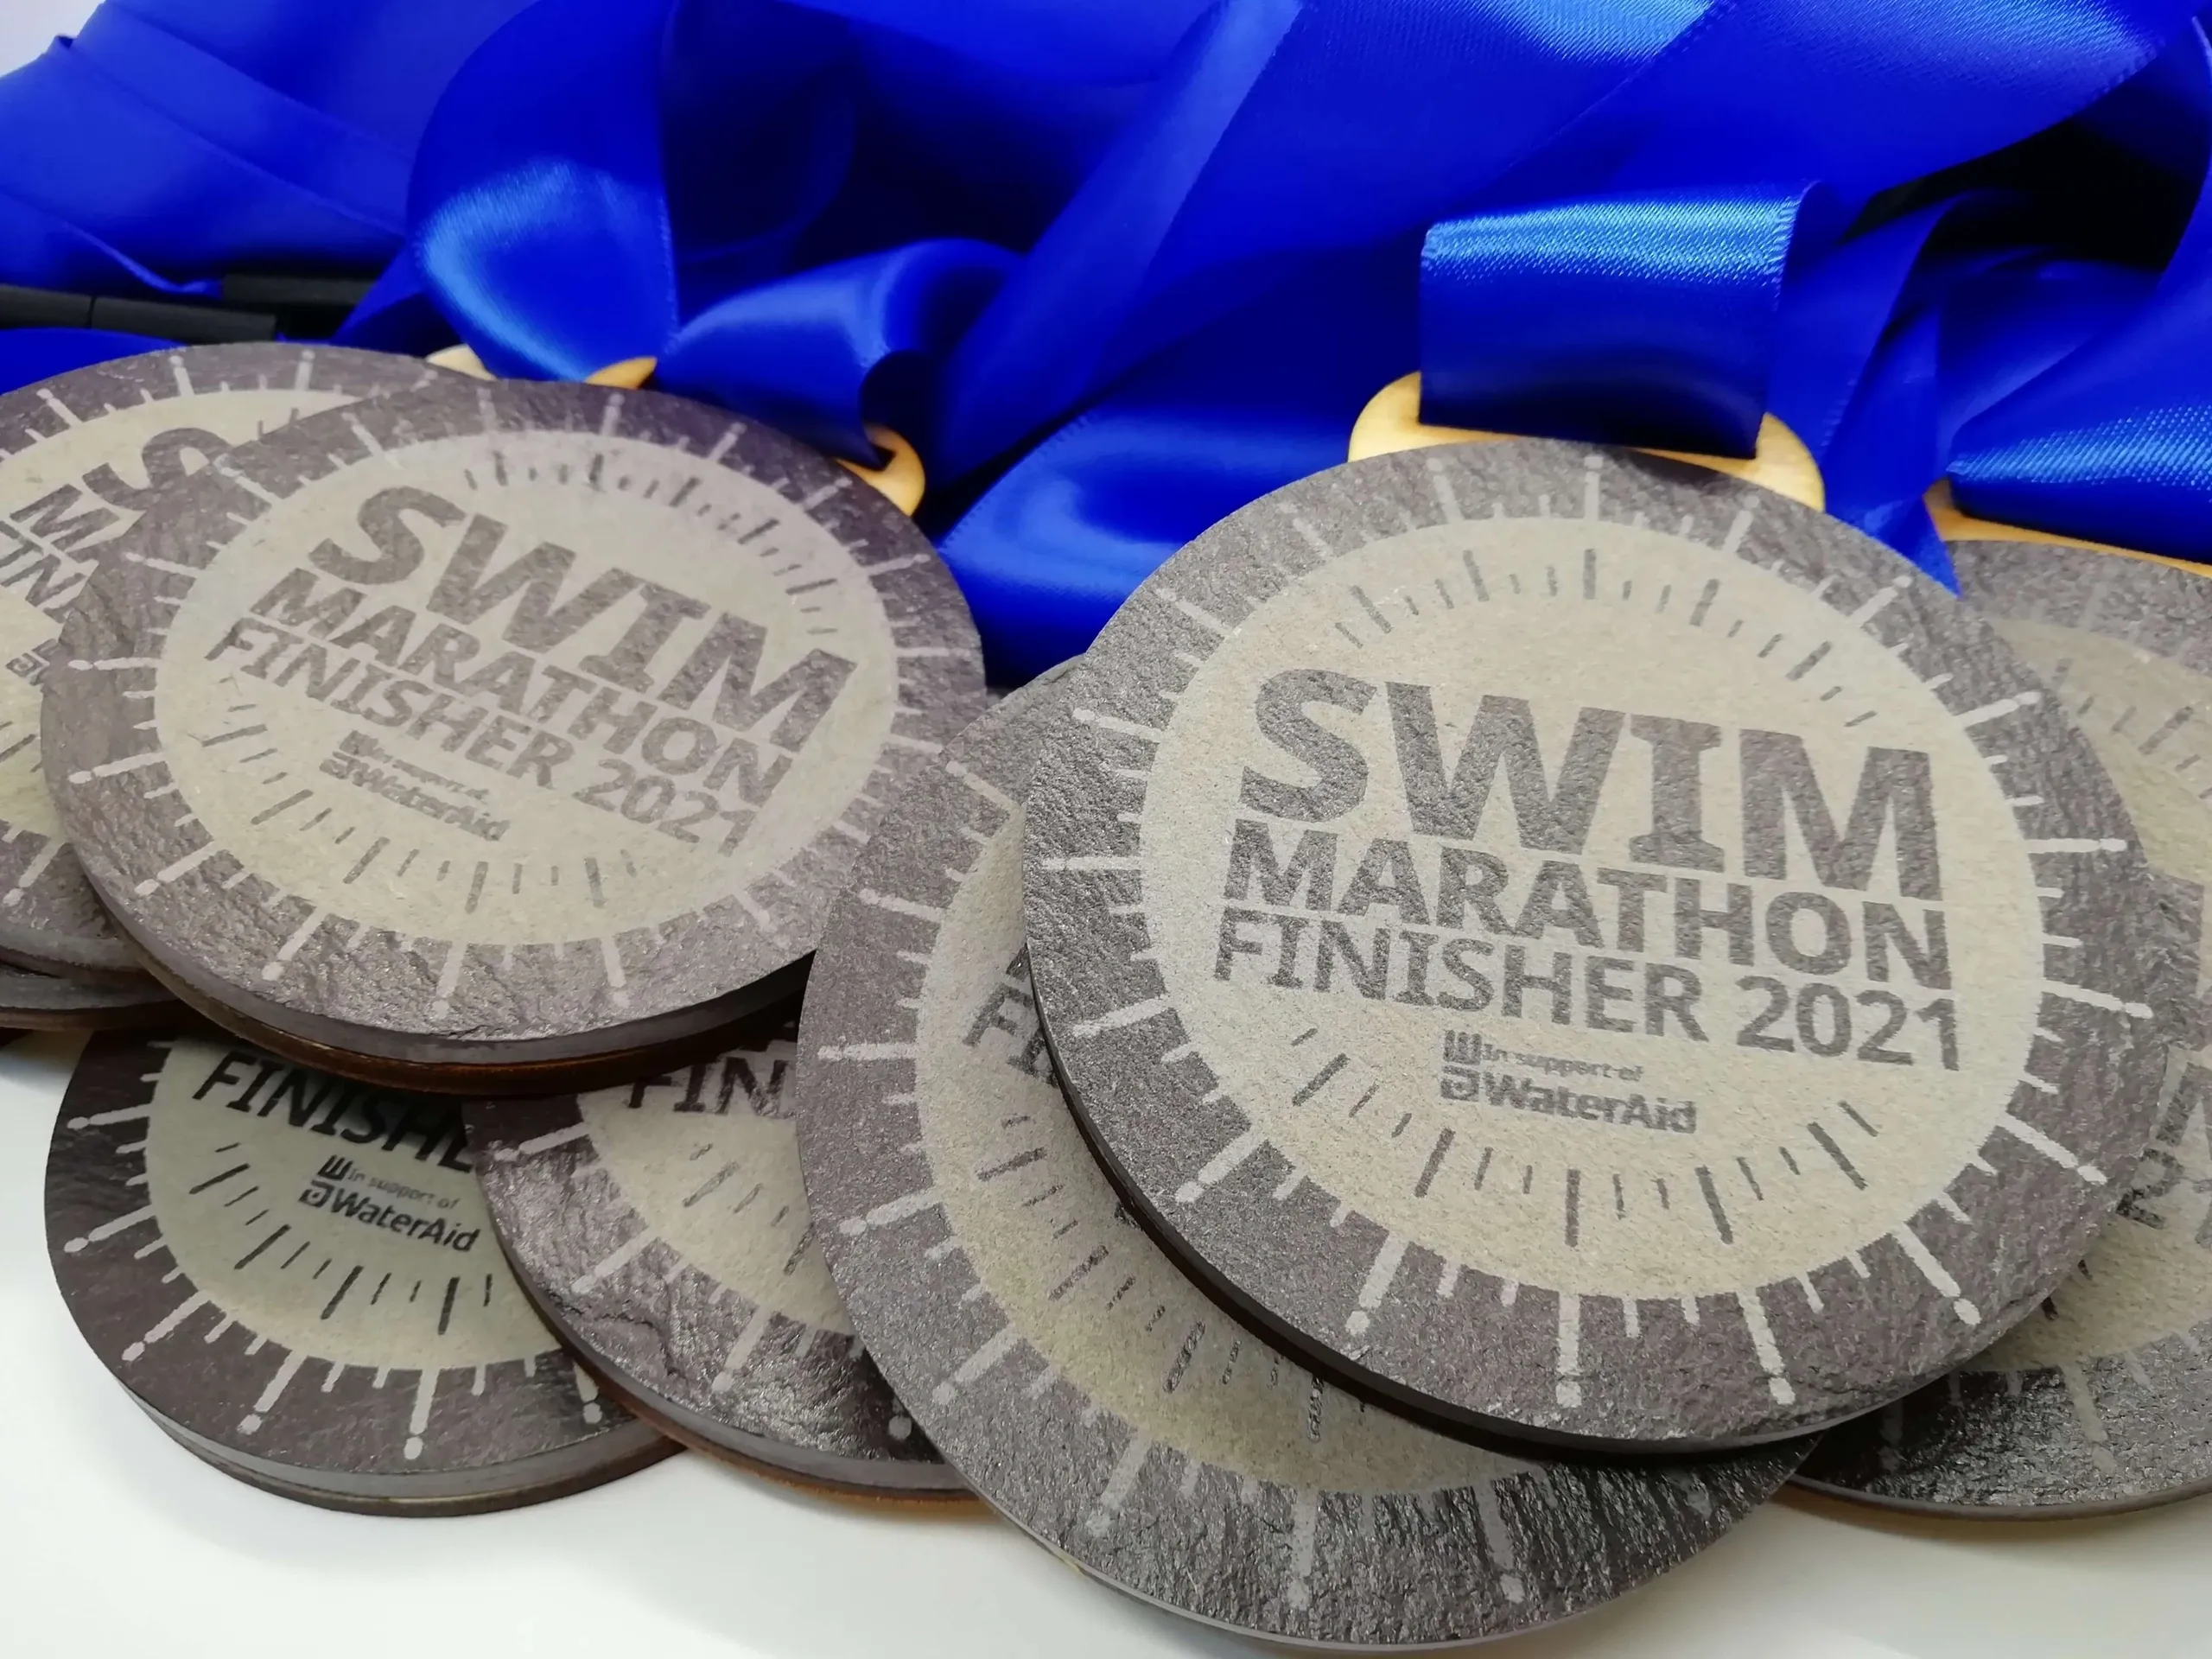 A group of Eco Friendly Slate Medals with the words swim marathon finisher 2021.